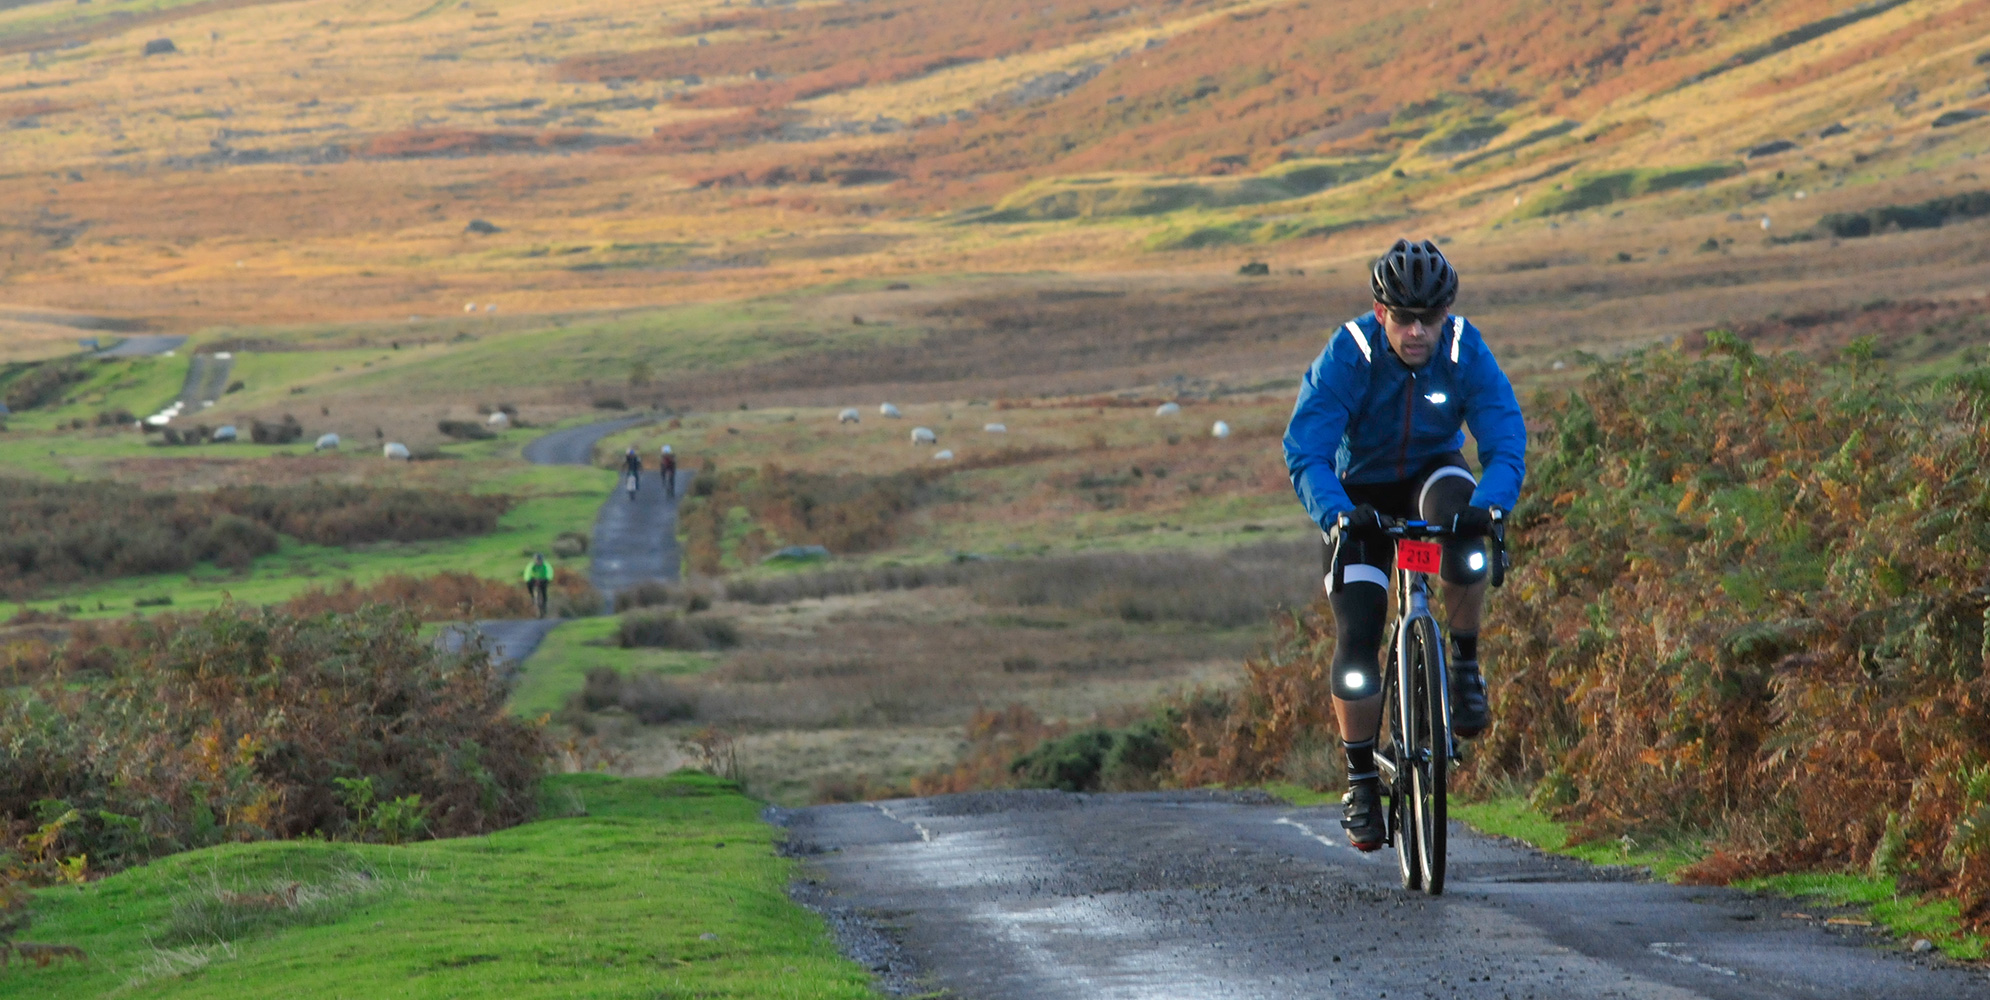 The Monster Miles is a 62 mile (55% off road) Cyclo-Cross Sportive organised by Cycling Weekly and run by Rather Be CyclingThese are leading riders coming up onto Caldbeck Commons from Mosedale early on a beautiful October morning